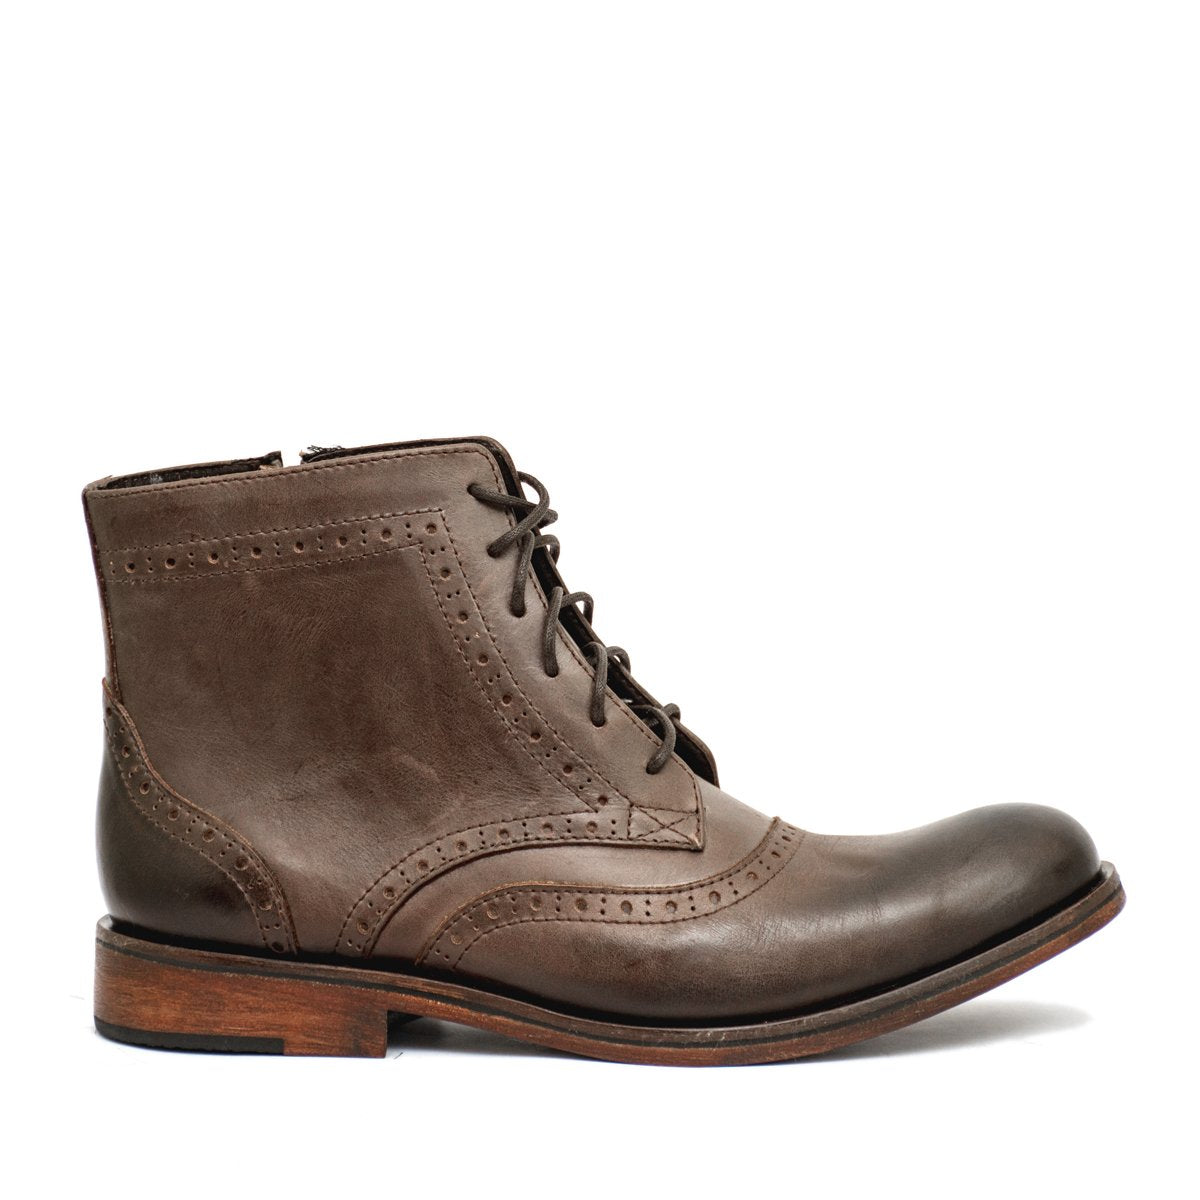 Urbano Frank - leather boots